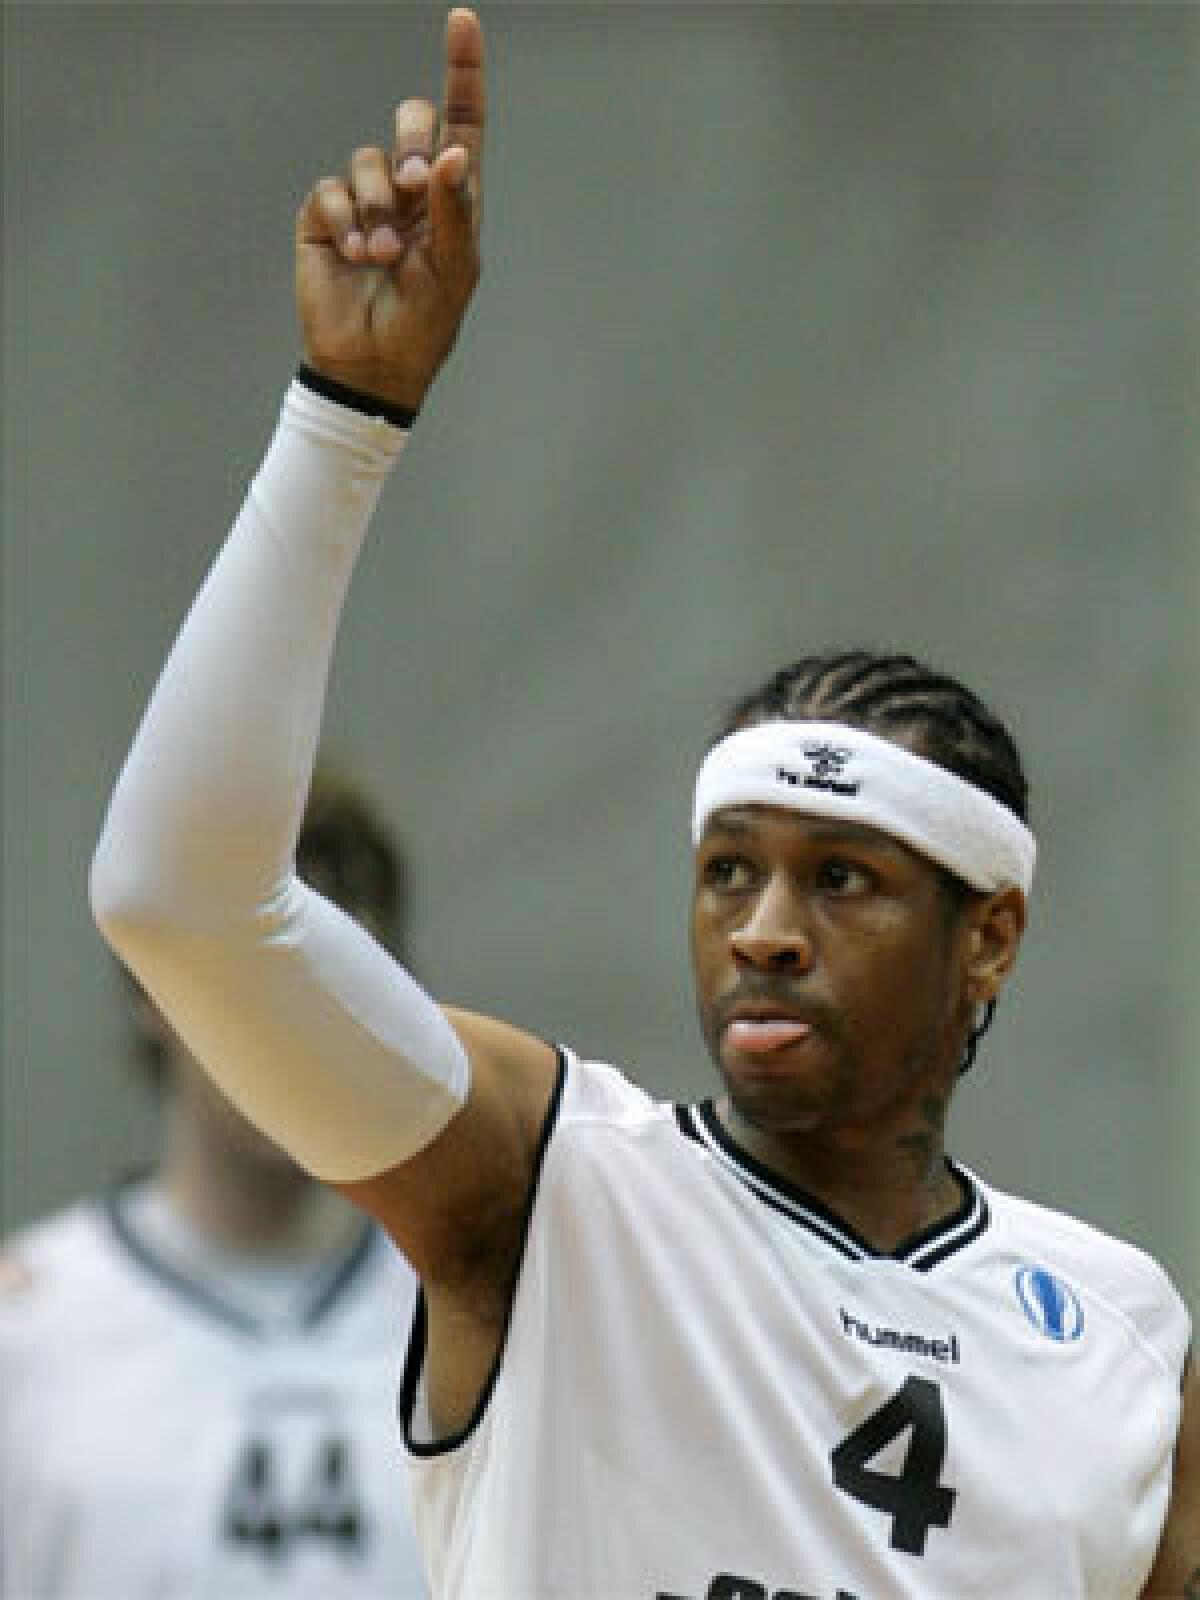 Allen Iverson, shown in 2010 while playing professional basketball in Turkey, still has his sights set on an NBA comeback.